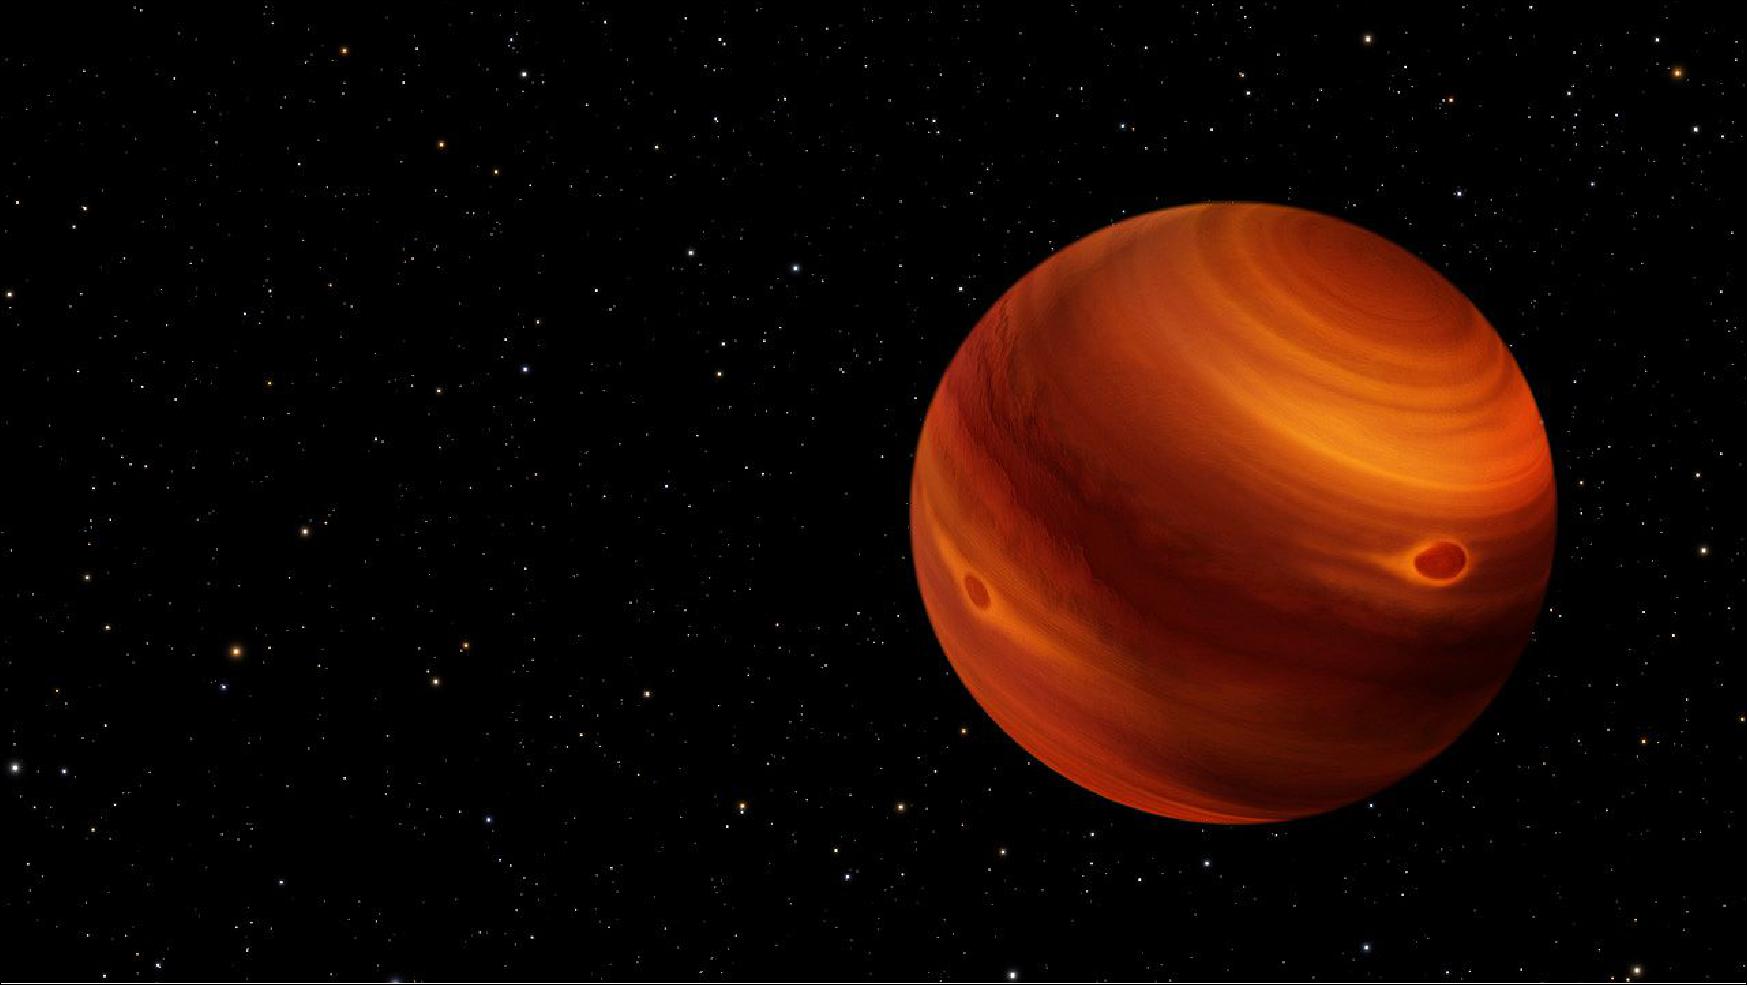 Figure 80: Observations of a nearby brown dwarf suggest that it has a mottled atmosphere with scattered clouds and mysterious dark spots reminiscent of Jupiter's Great Red Spot, as shown in this artist's concept. The nomadic object, called 2MASS J22081363+2921215, resembles a carved Halloween pumpkin, with light escaping from its hot interior. Brown dwarfs are more massive than planets but too small to sustain nuclear fusion, which powers stars. - Though only roughly 115 light-years away, the brown dwarf is too distant for any features to be photographed. Instead, researchers used the Multi-Object Spectrograph for Infrared Exploration (MOSFIRE) at the W. M. Keck Observatory in Hawaii to study the colors and brightness variations of the brown dwarf's layer-cake cloud structure, as seen in near-infrared light. MOSFIRE also collected the spectral fingerprints of various chemical elements contained in the clouds and how they change with time [image credit: Artwork: NASA, ESA, STScI, Leah Hustak (STScI)]